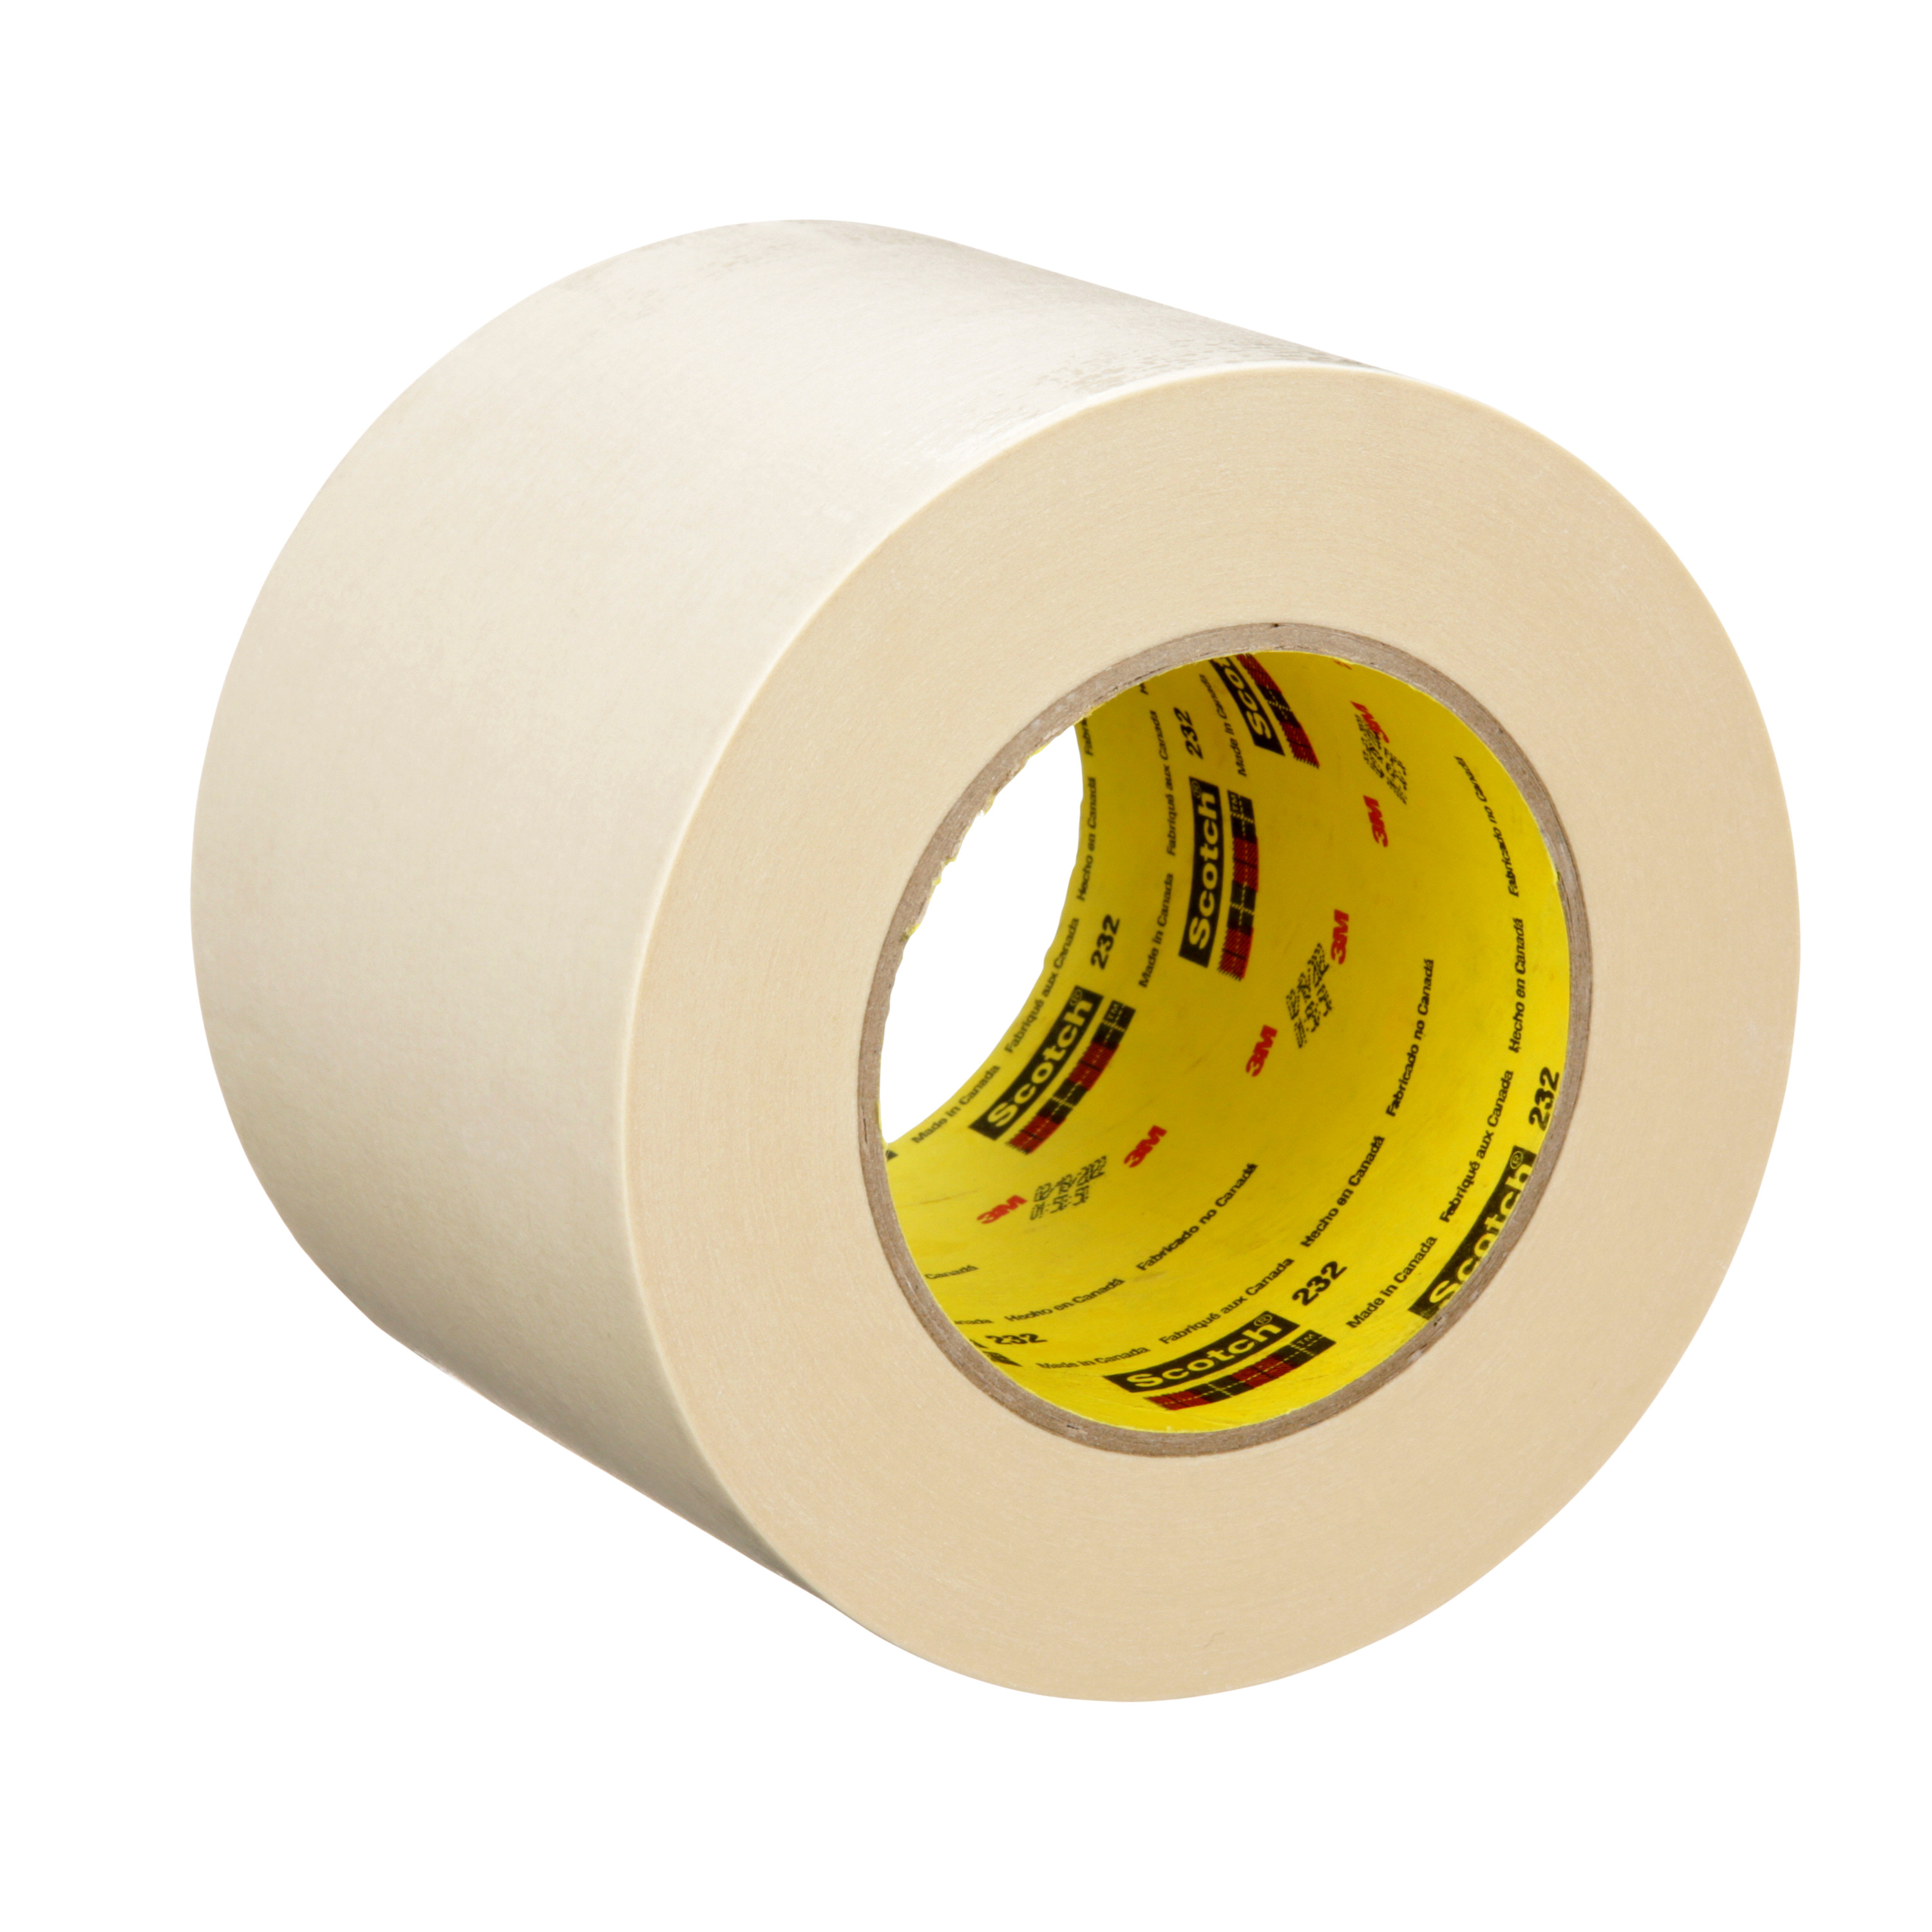 Product Number 232 | 3M™ High Performance Masking Tape 232